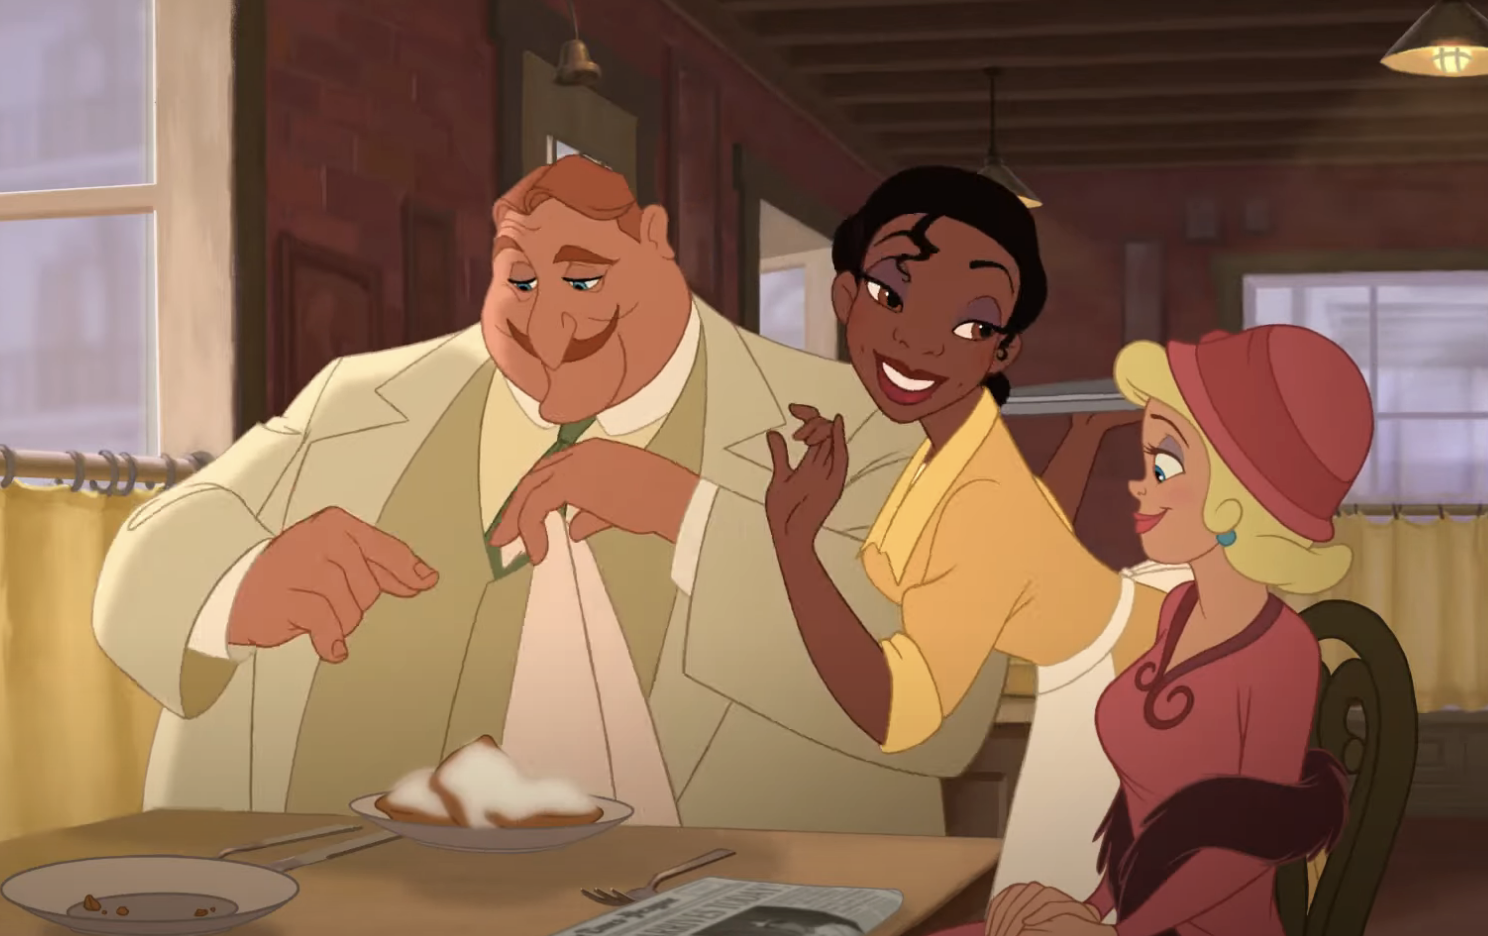 Animated characters, a man and Tiana from &quot;The Princess and the Frog,&quot; in a cozy diner setting with a pie on the table